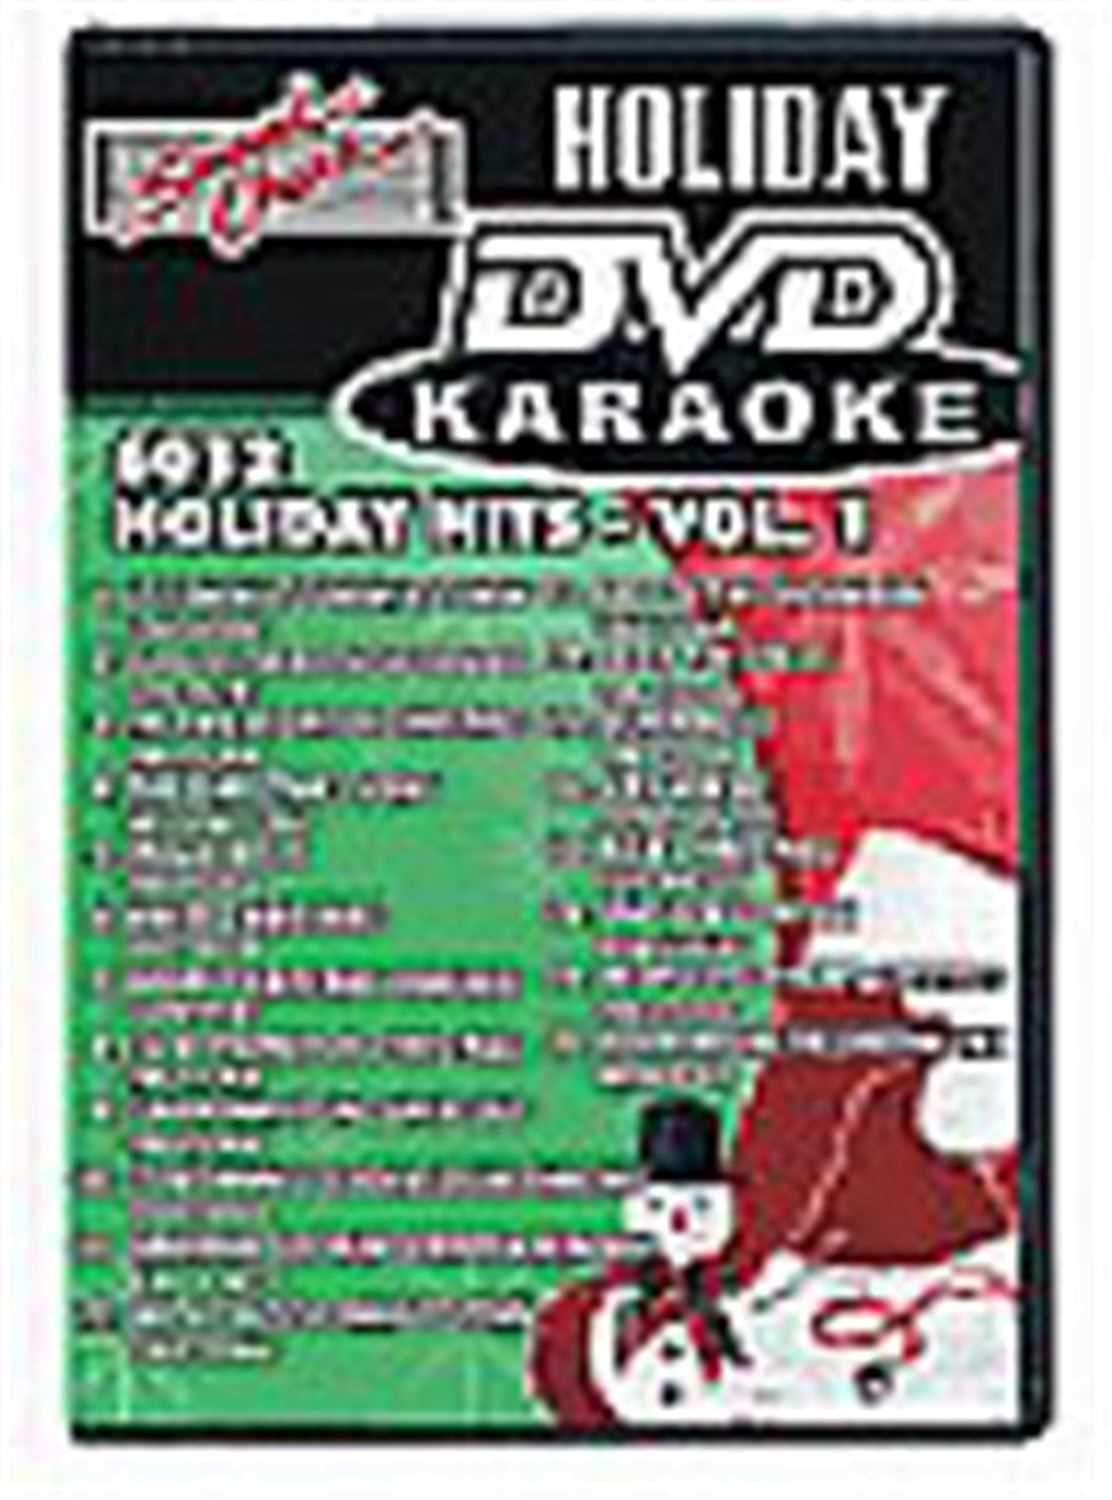 Sound Choice 6012 Holiday Hits Dvd Karaoke Vol 1 - ProSound and Stage Lighting